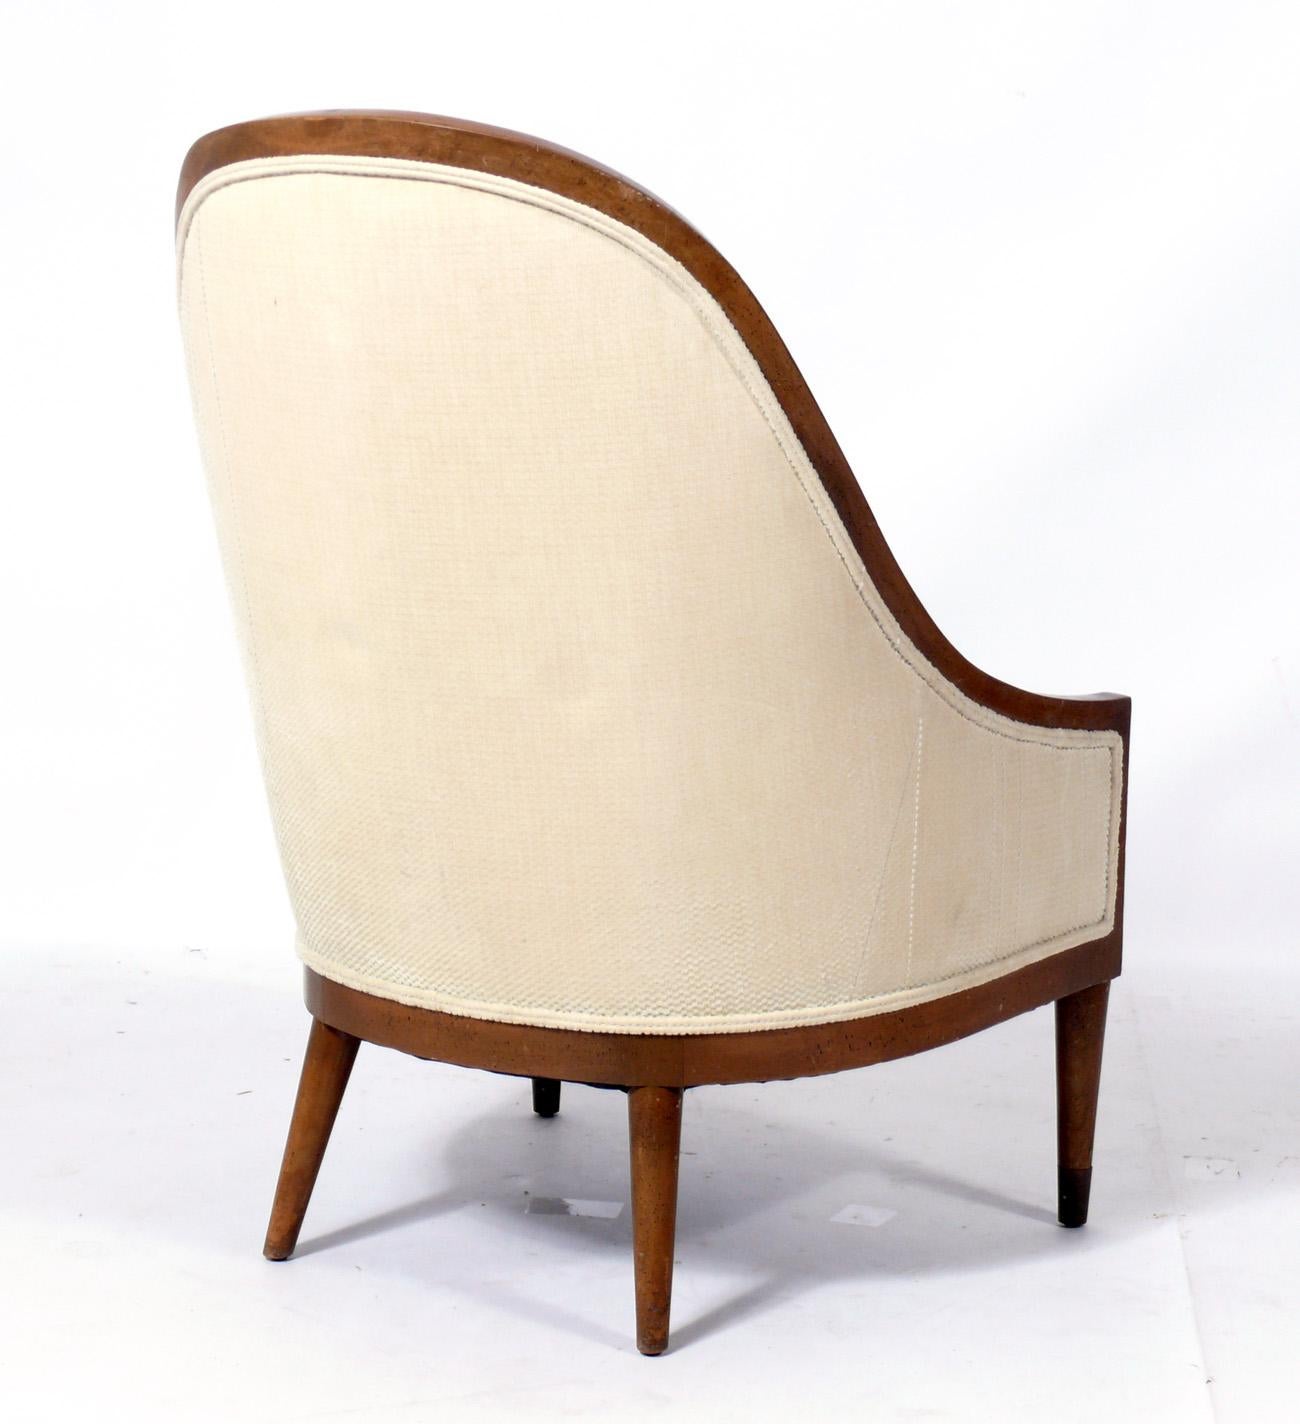 American Pair of Tall Arch Back Lounge Chairs Attributed to Jacques Grange